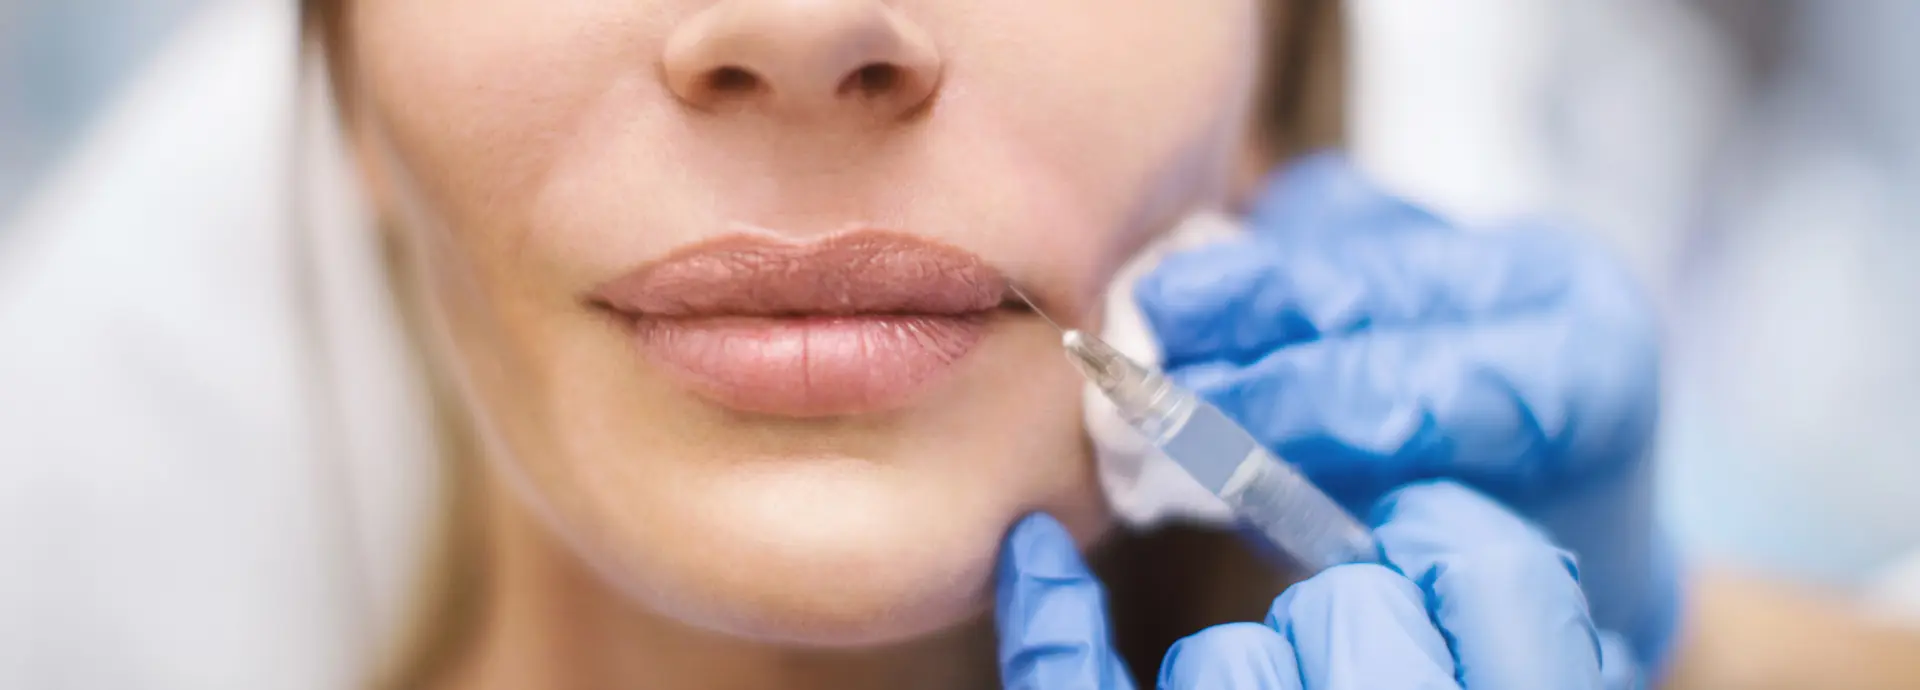 Close-up of a person receiving a lip filler injection administered by a professional wearing blue gloves.